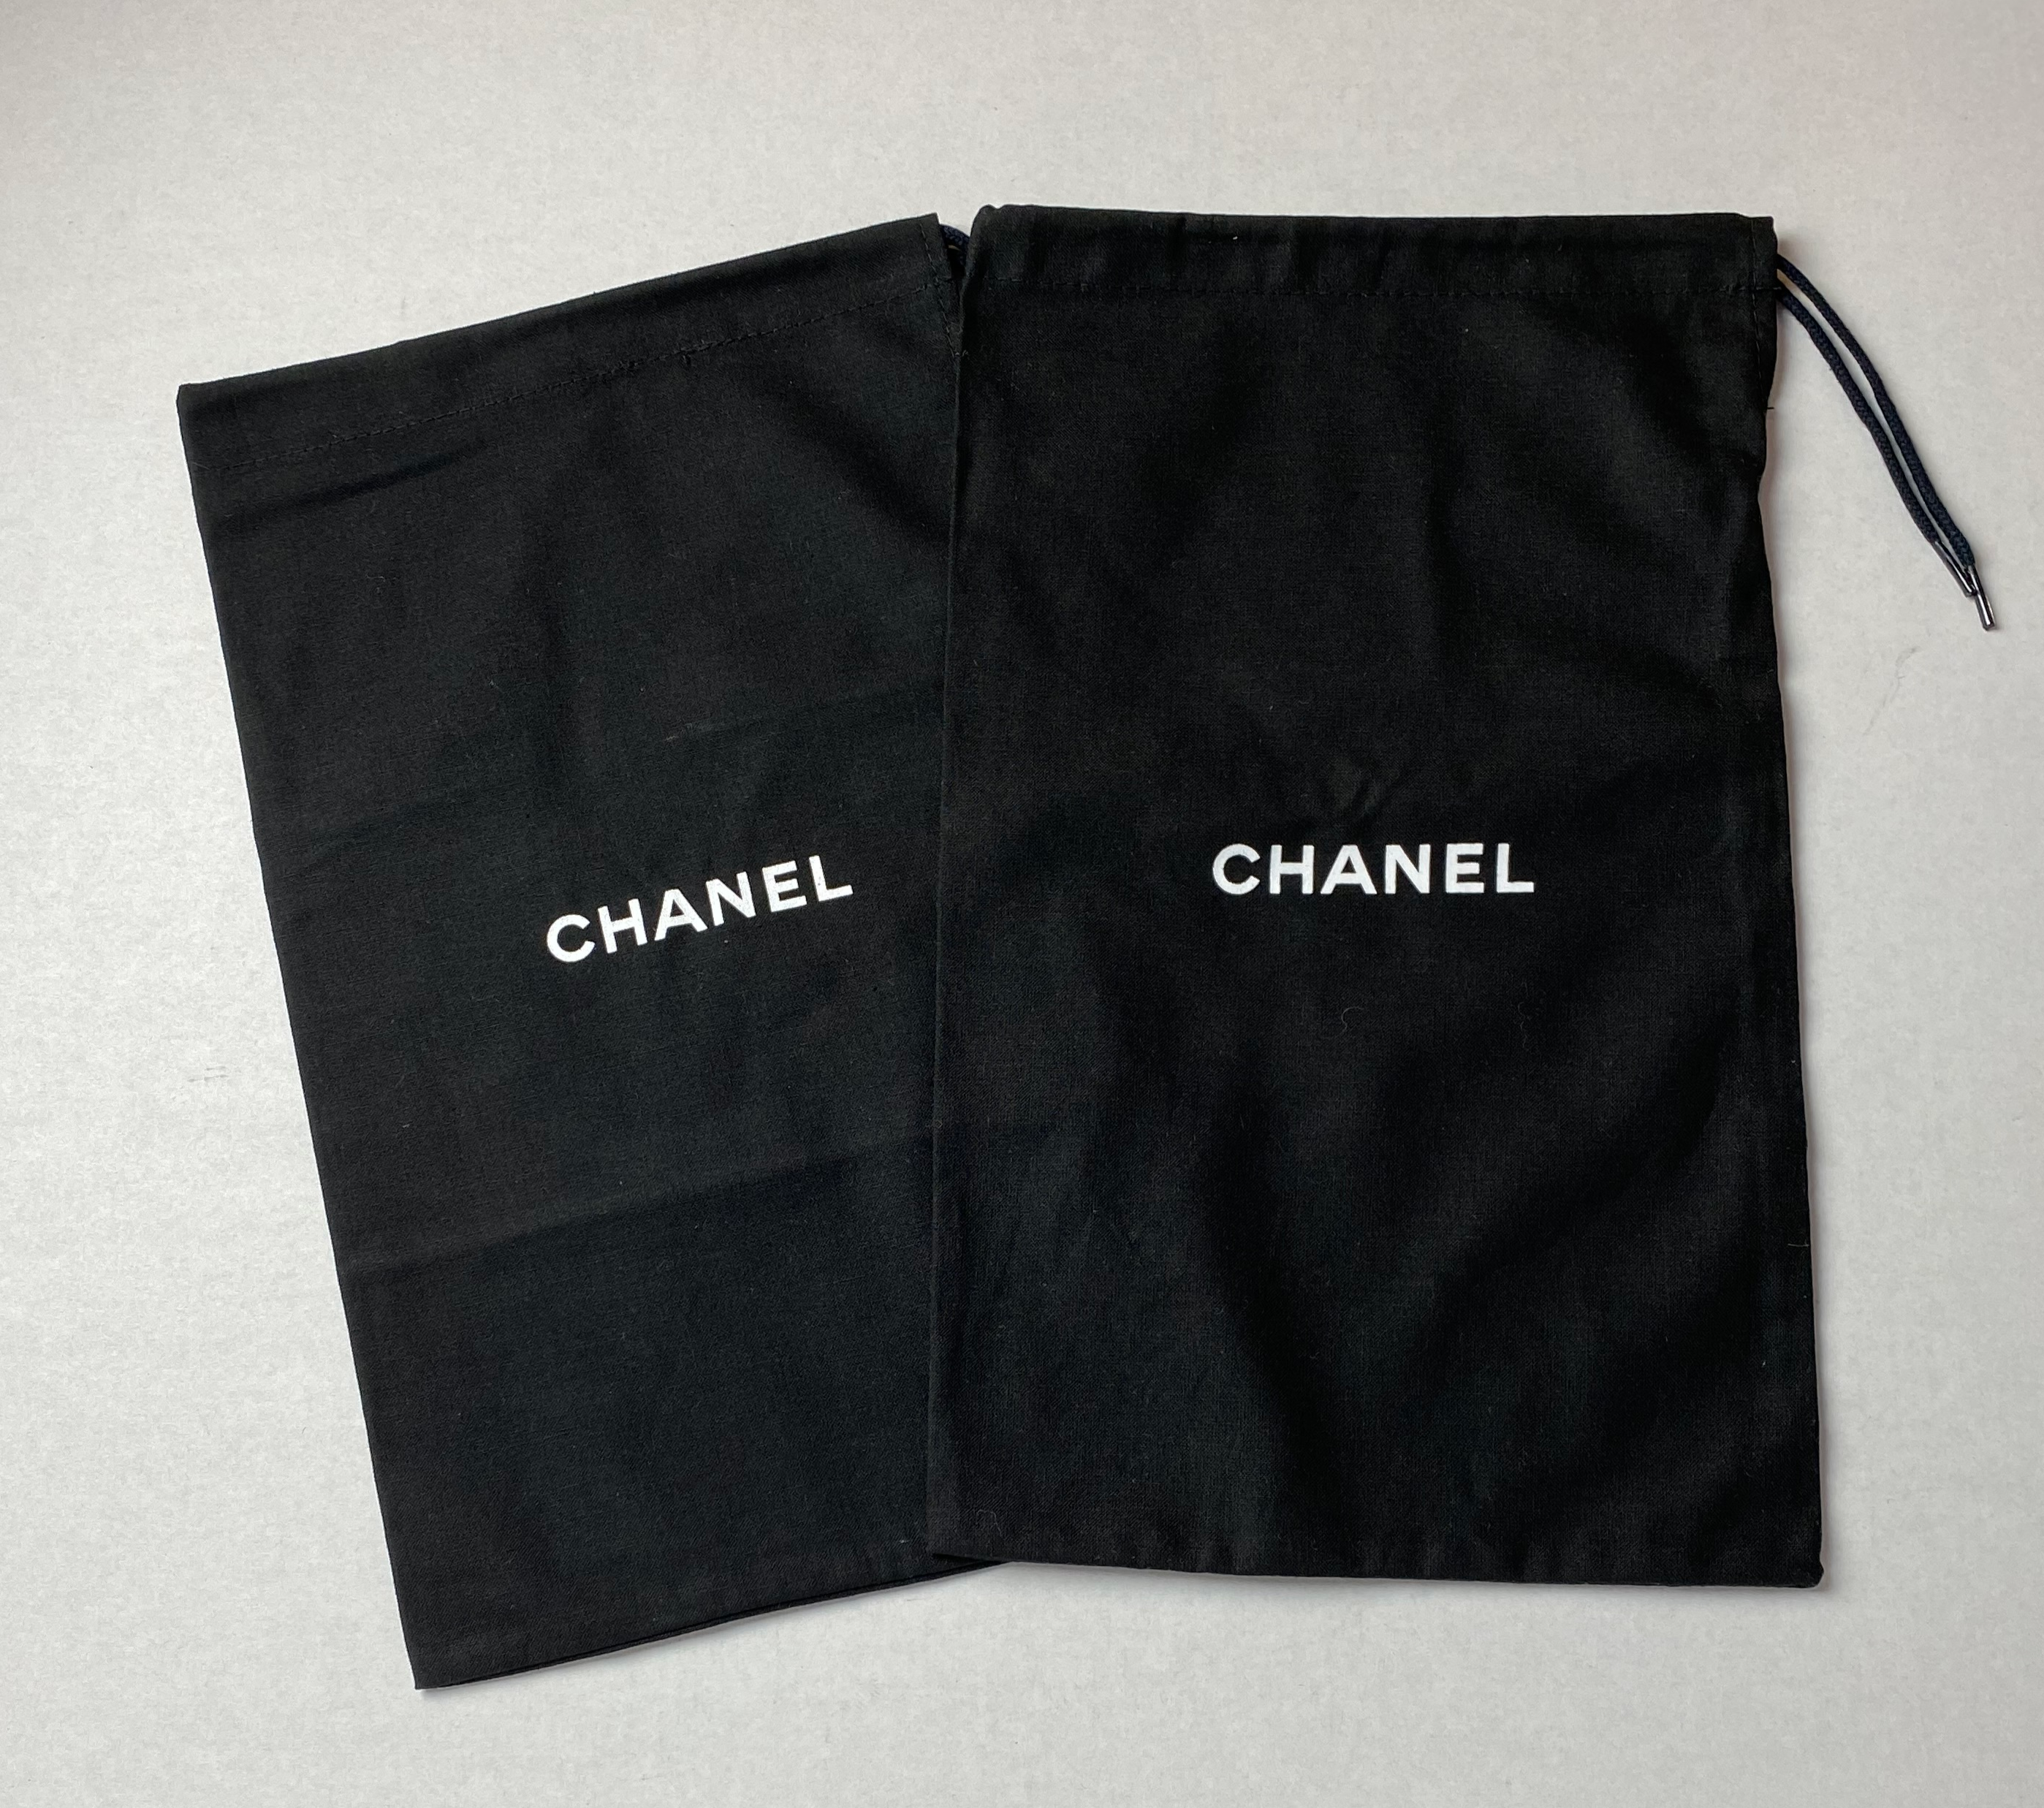 chanel bags for sale nordstrom